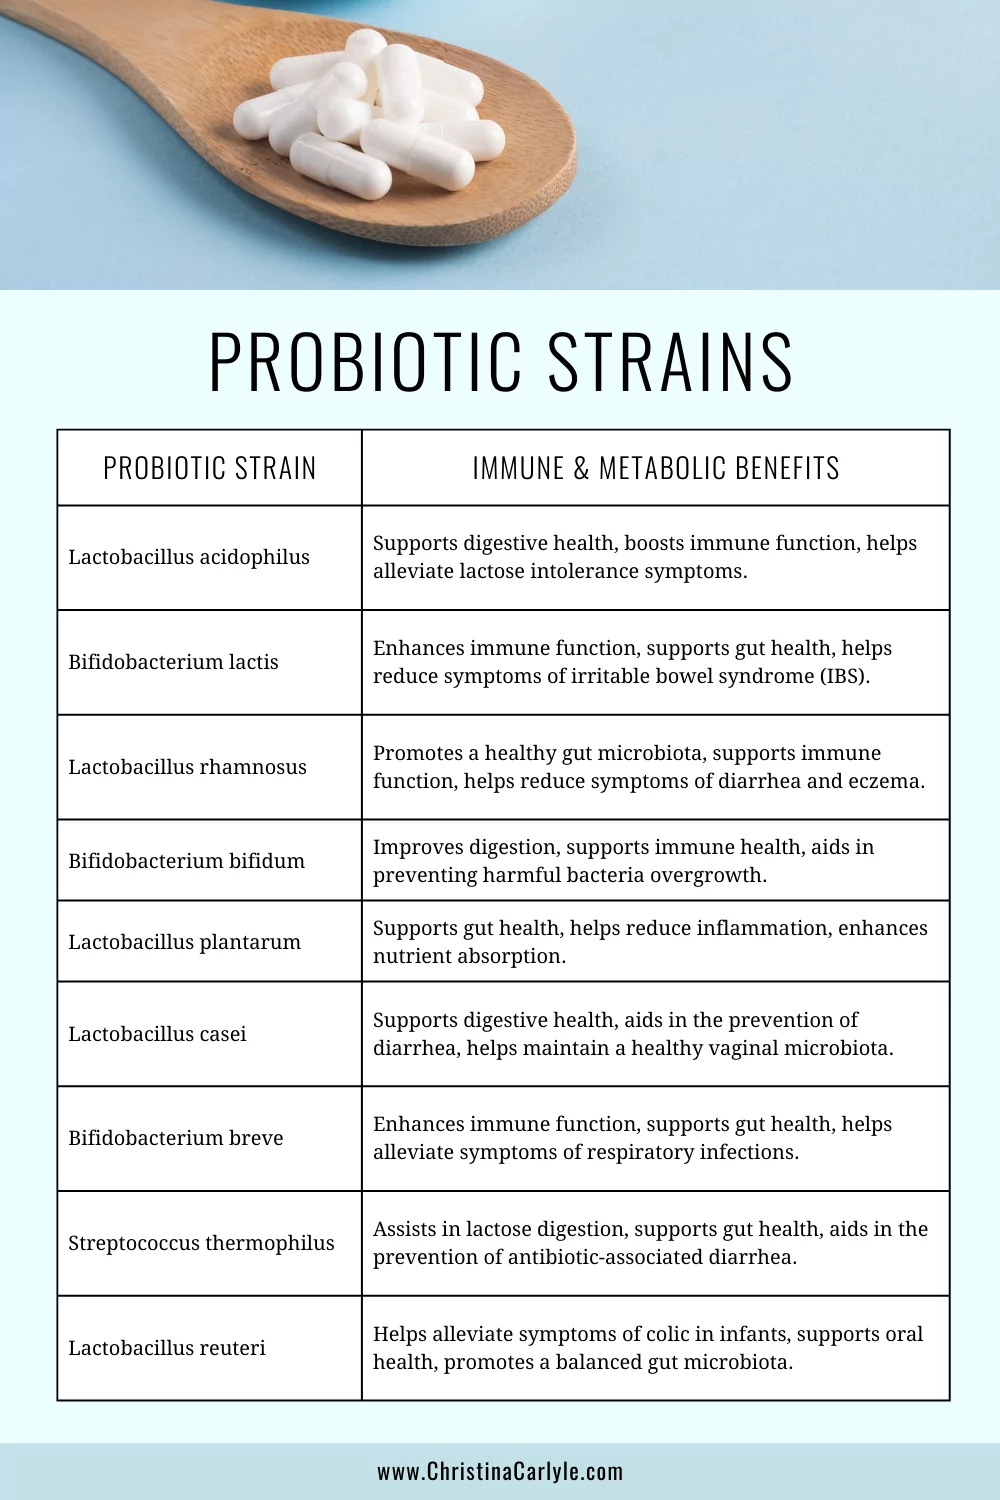 a chart comparing the different probiotic strains and their benefits